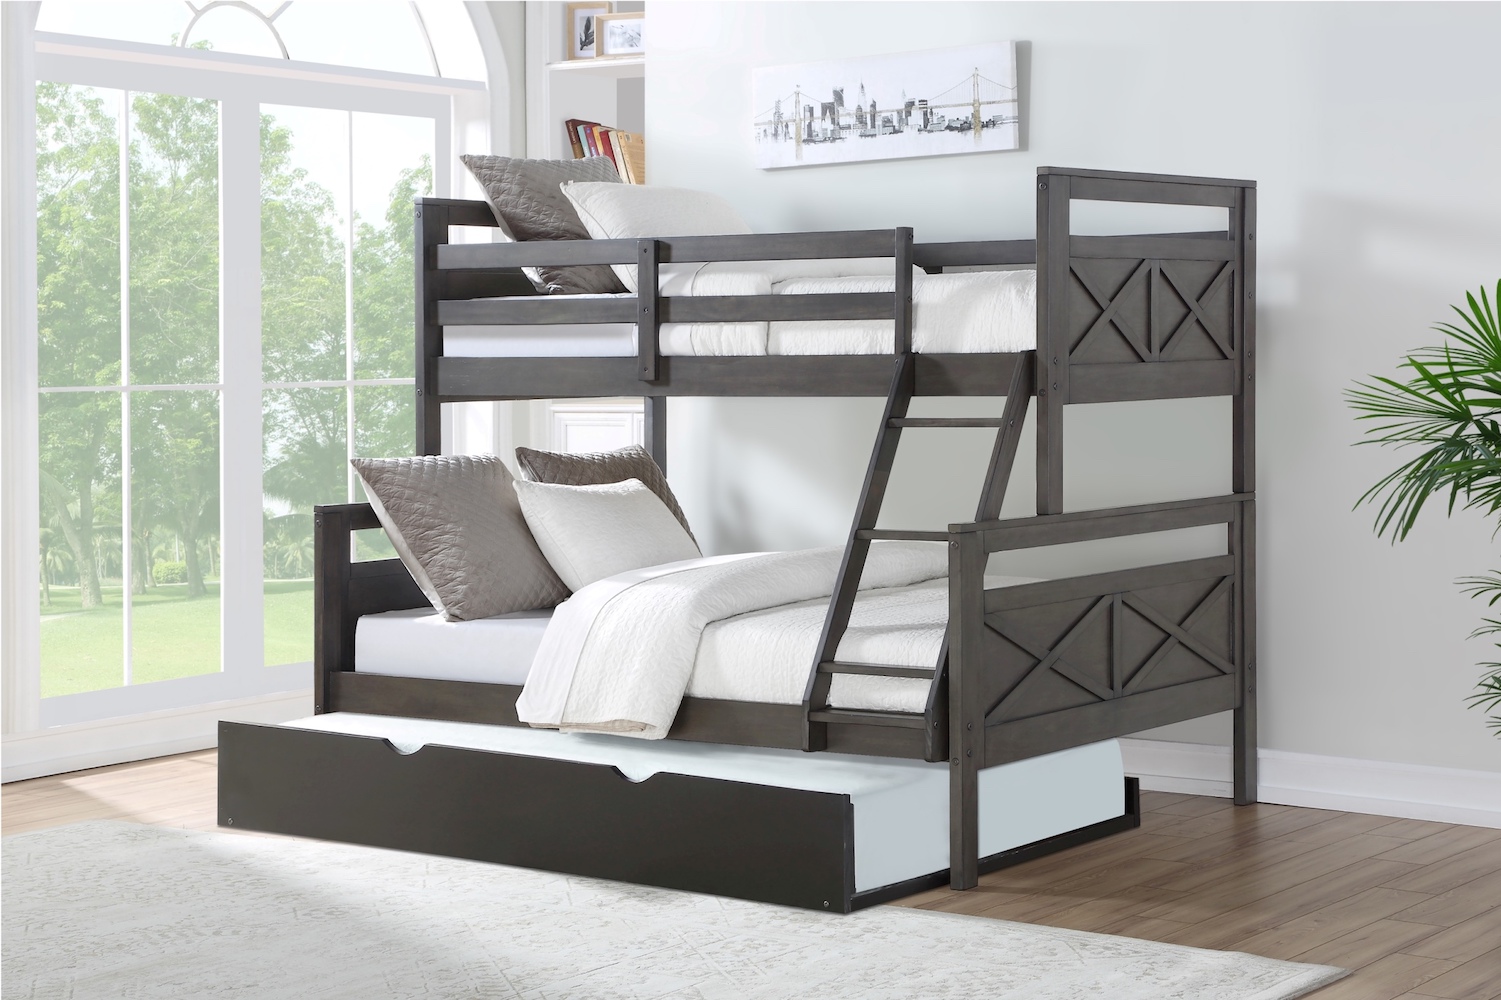 Donco Kids Furniture Twin Panel Bunkbed Twin Trundle